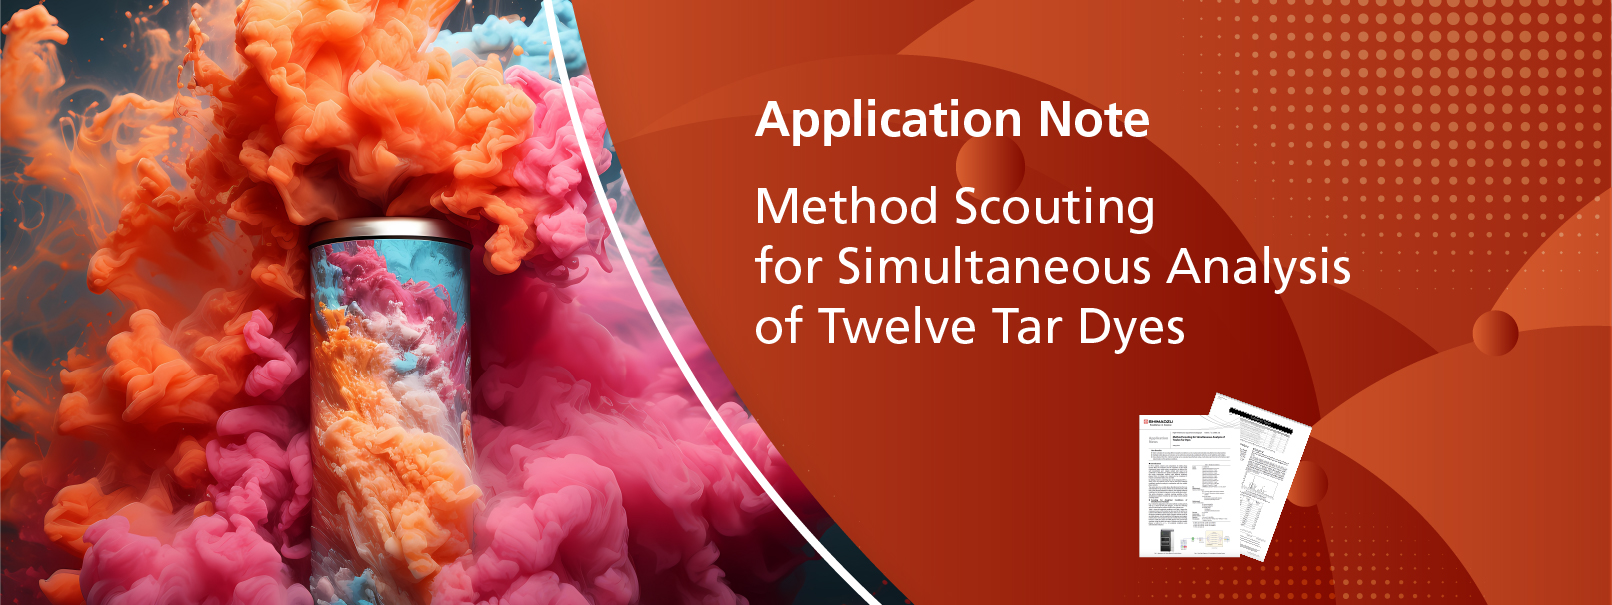 Method Scouting for Simultaneous Analysis of Twelve Tar Dyes